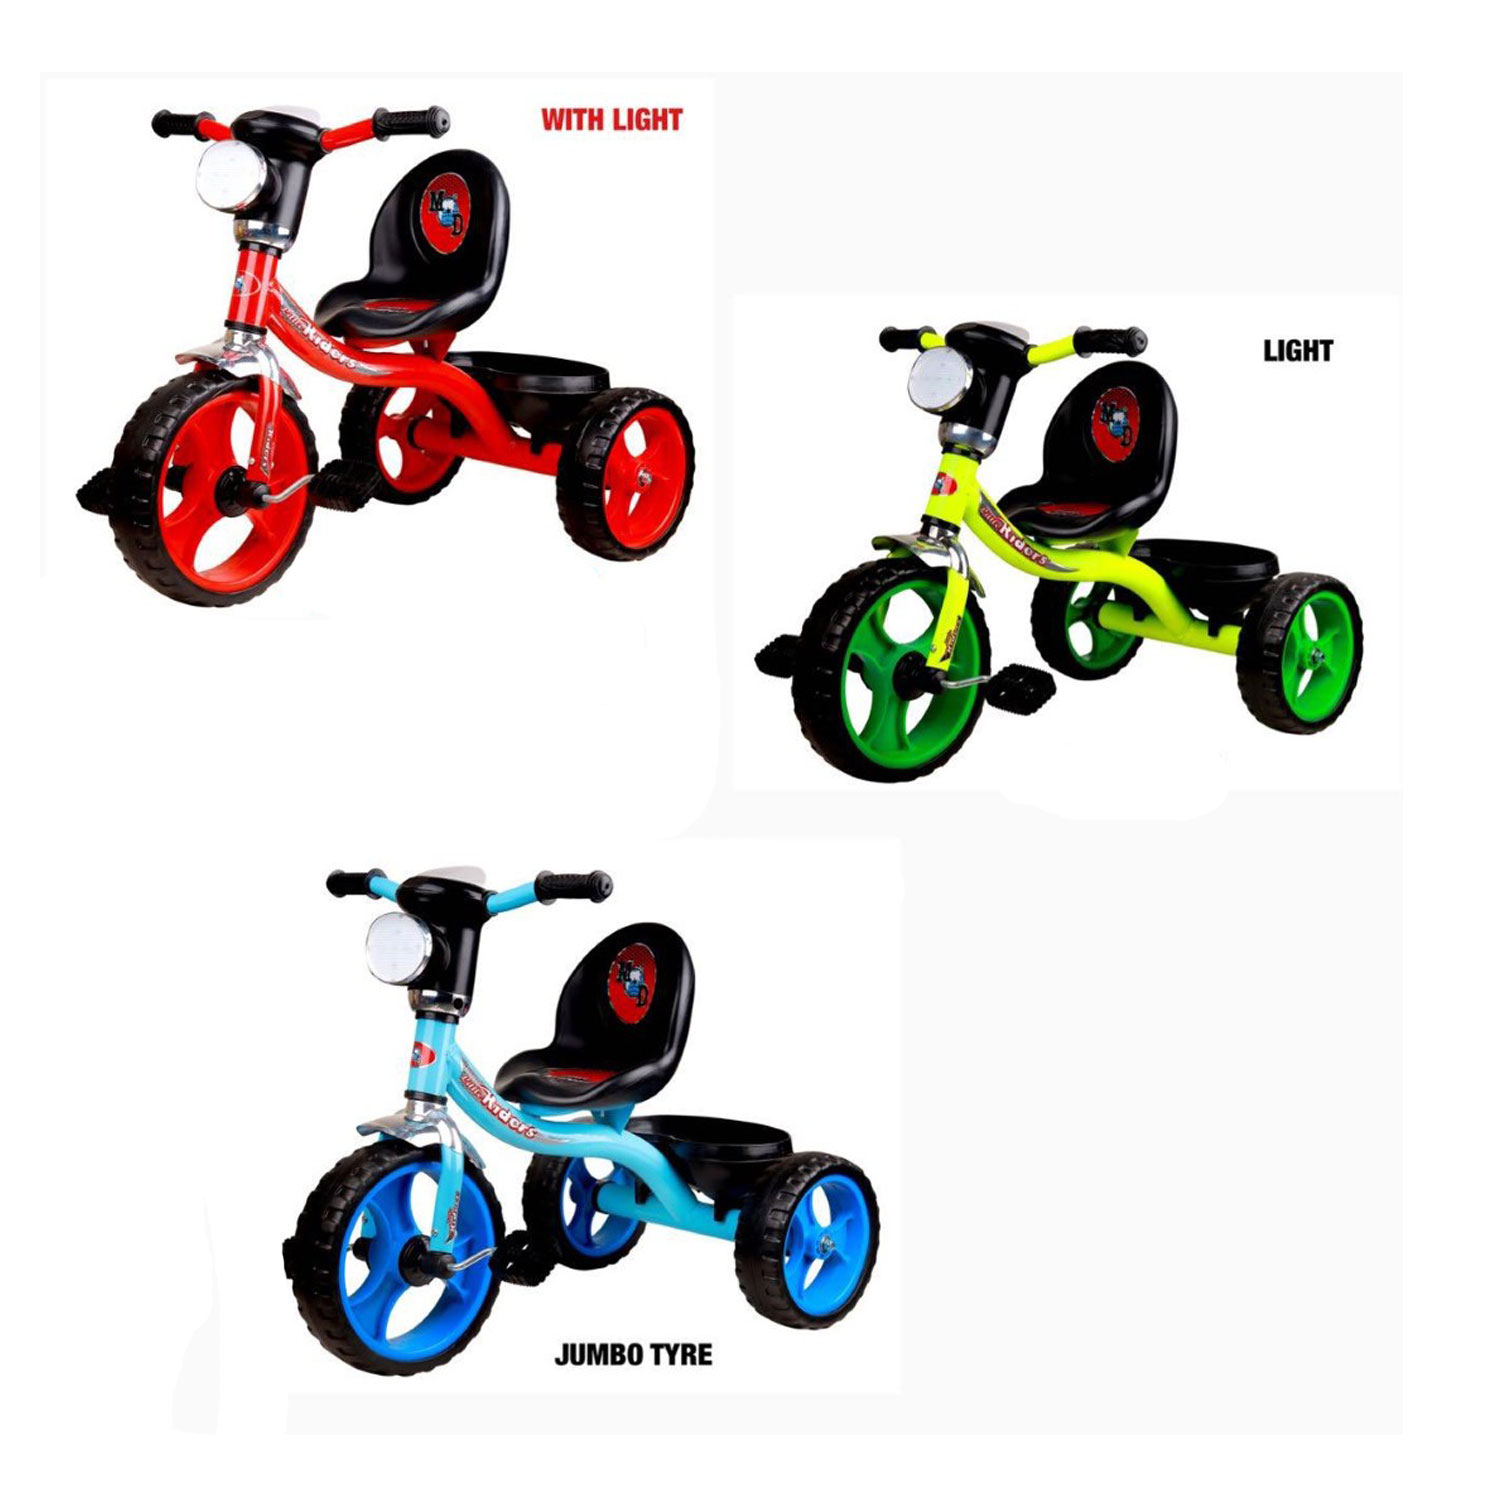 NAVRANGI BABY TRICYCLE FOR KIDS WITH FRONT OR BACK BASKET AND PARENT HANDLE. TRICYCLE FOR KIDS KBQ-178 